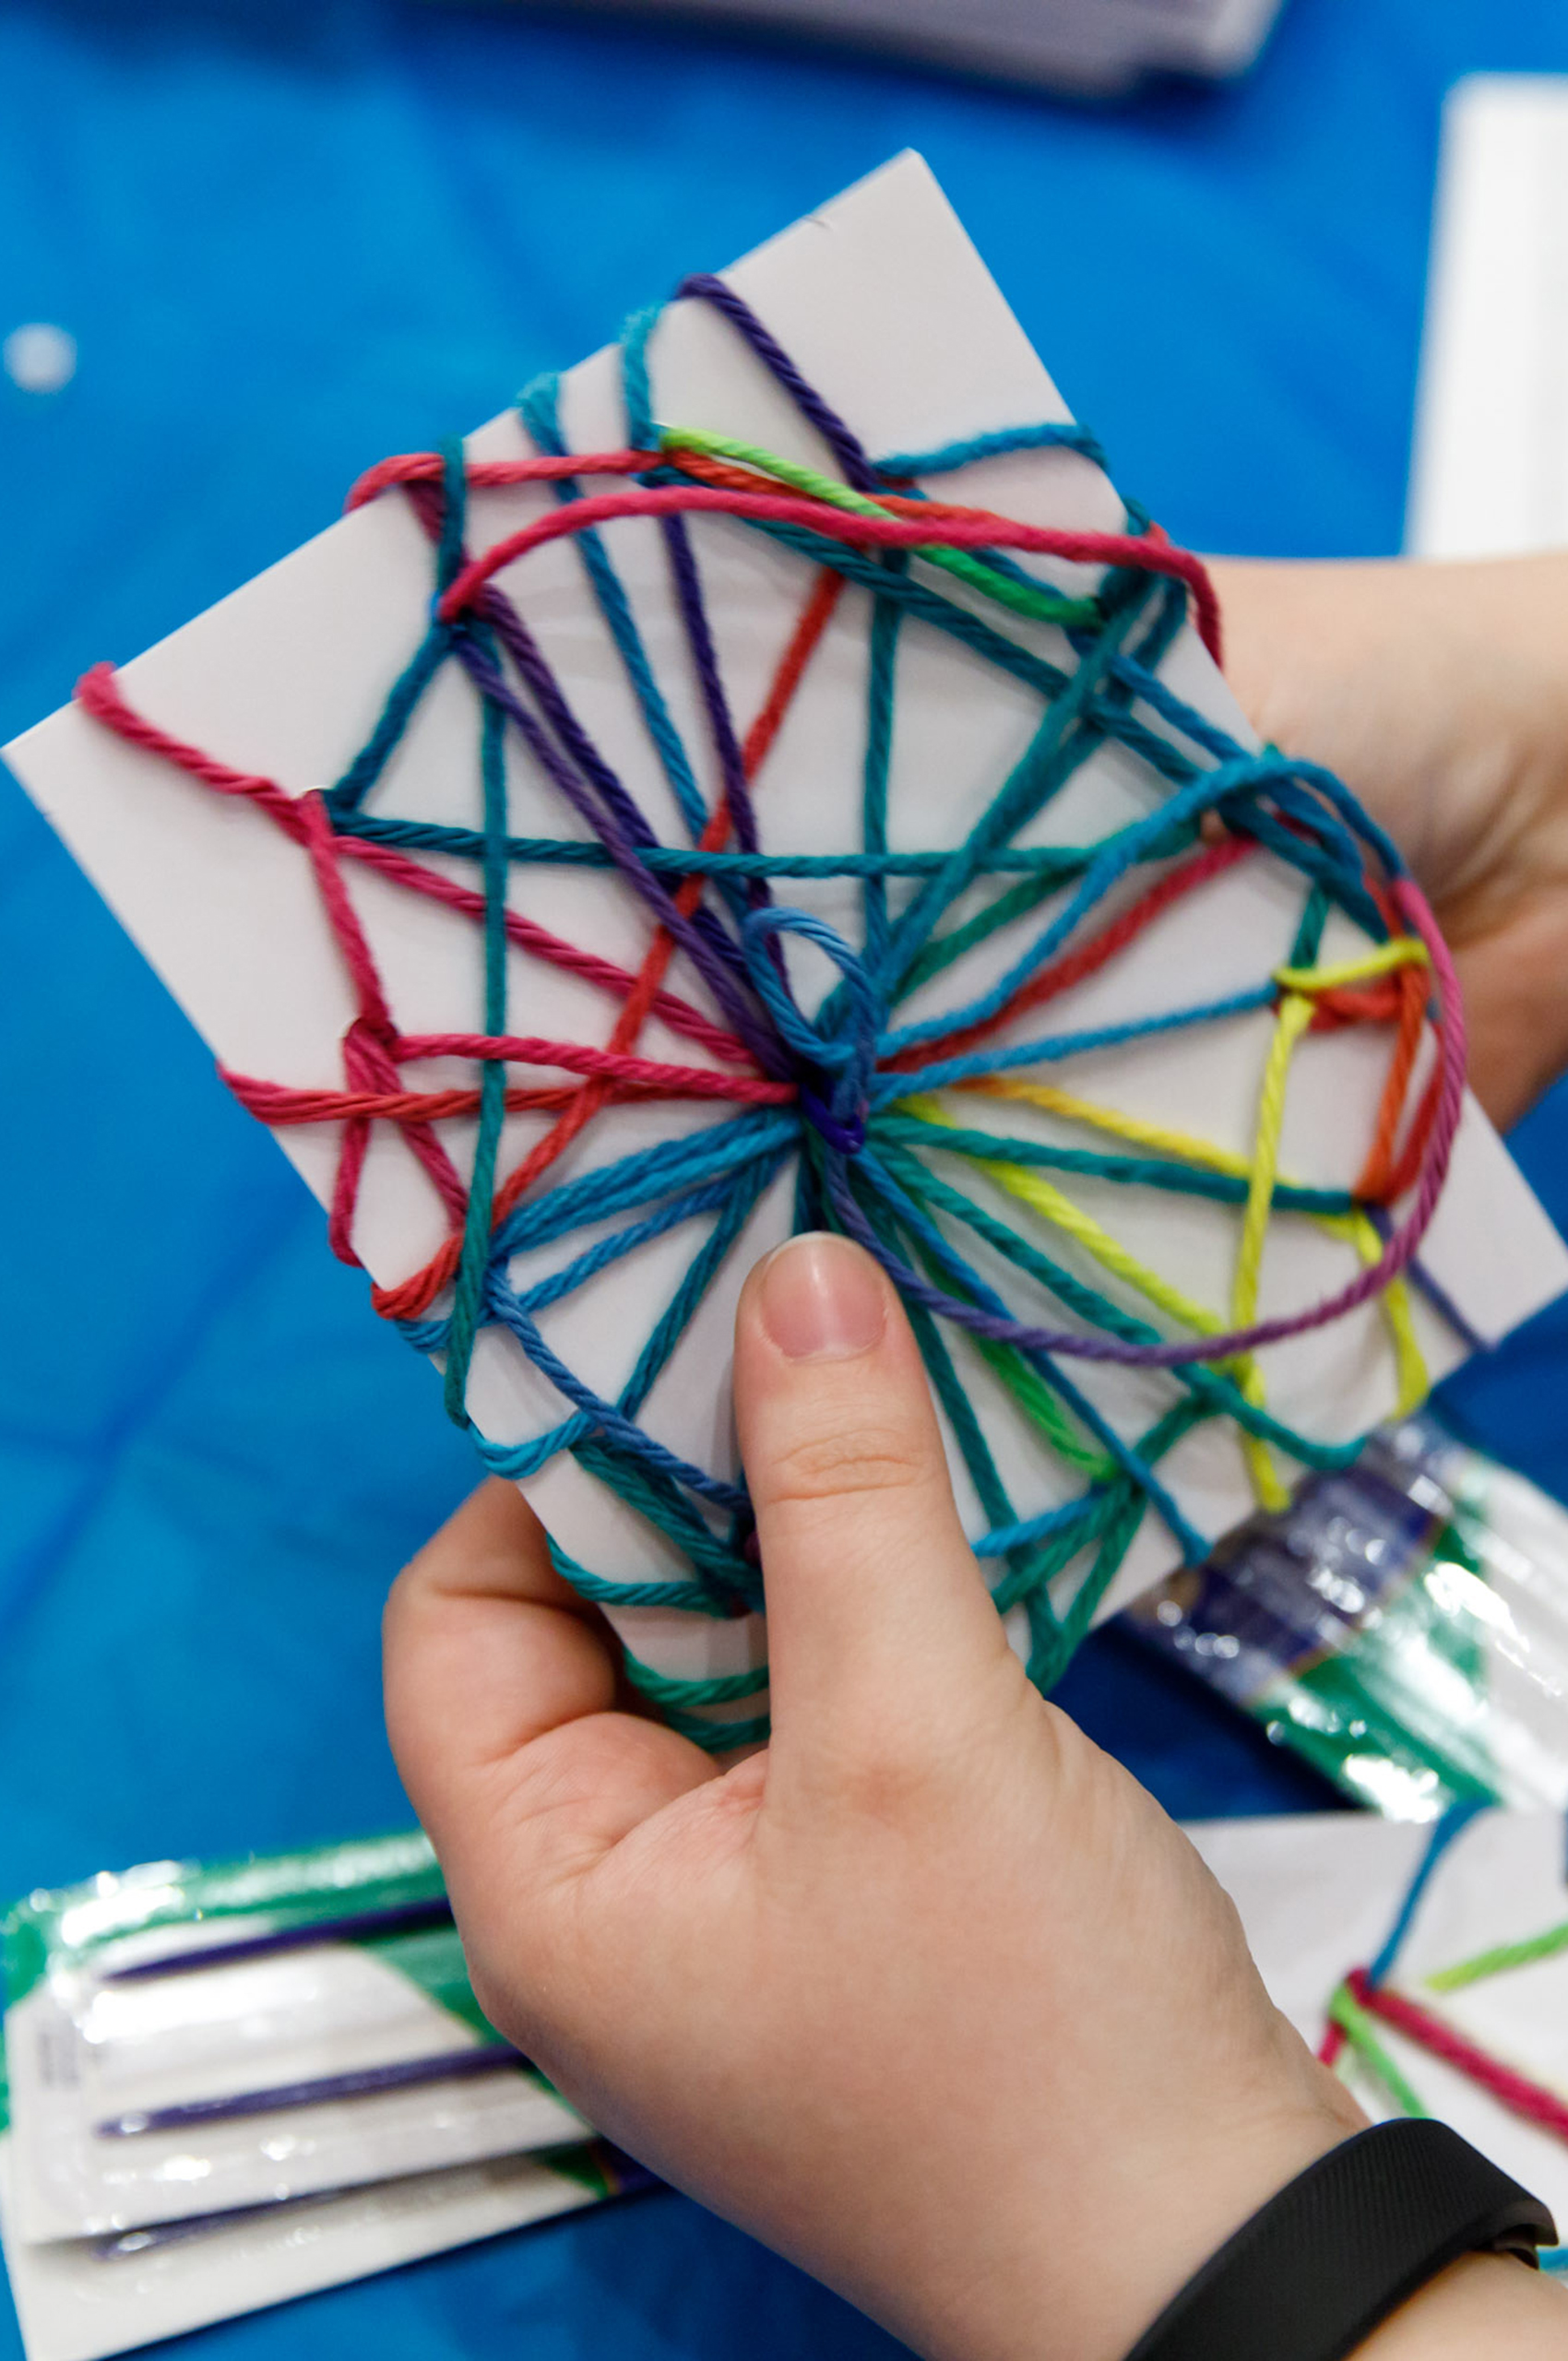 A child's hands hold a white card with a web of colorful yarn around it